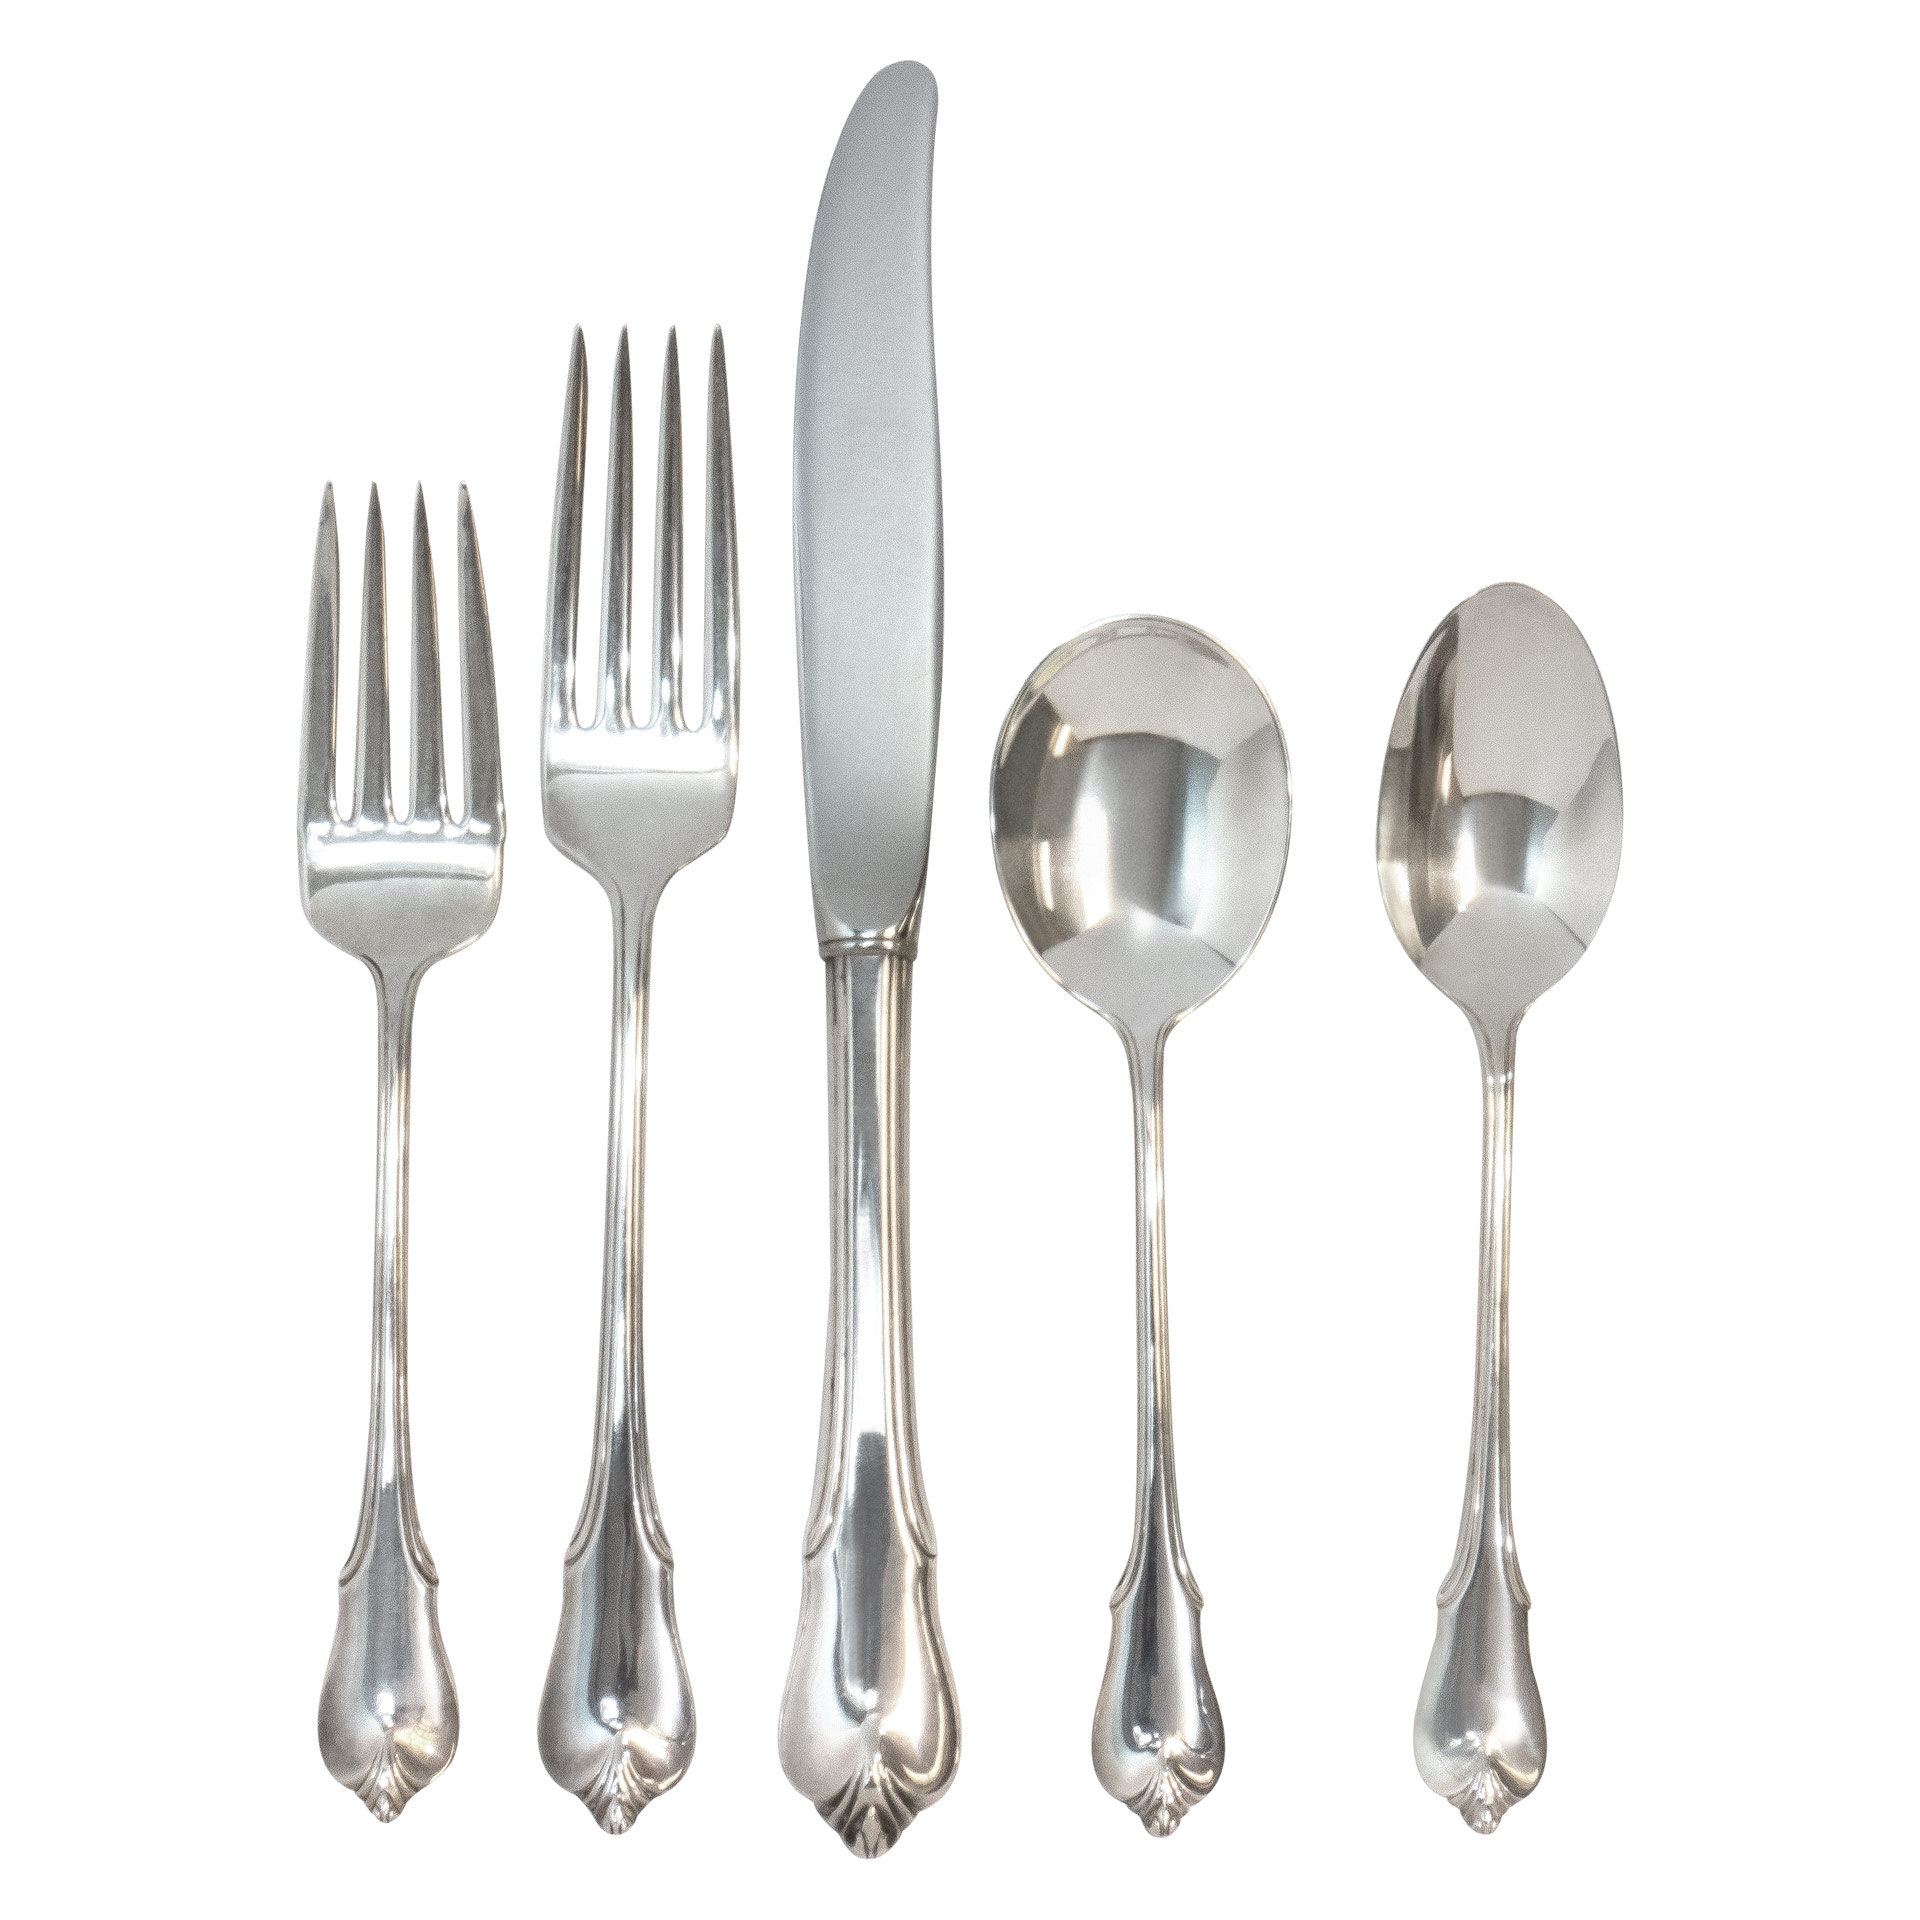 "GRAND COLONIAL" Sterling Silver Flatware Set patented in 1942 by WALLACE. 5 Place Setting for 12 + 11 Serving Pieces. Over 2300 grams of Sterling Silver.